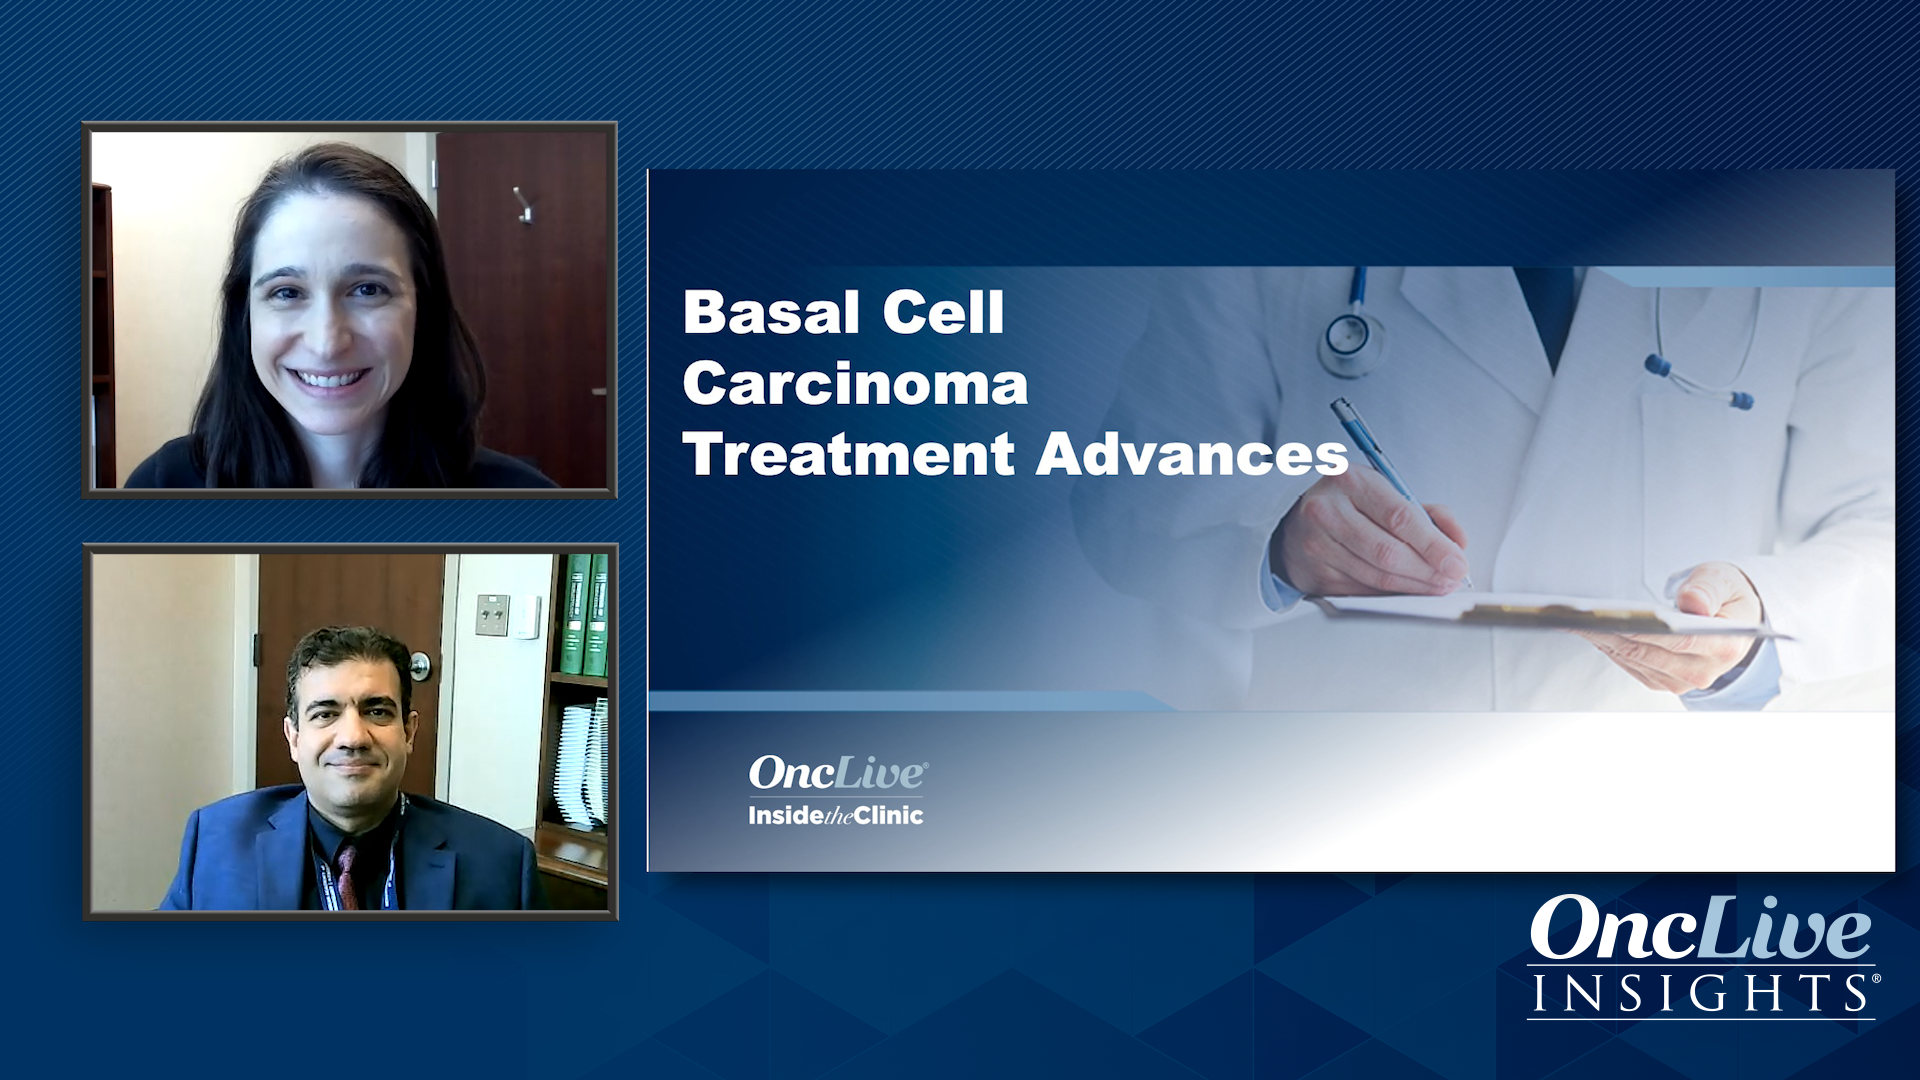 Treatment Options for Locally Advanced Basal Cell Carcinoma